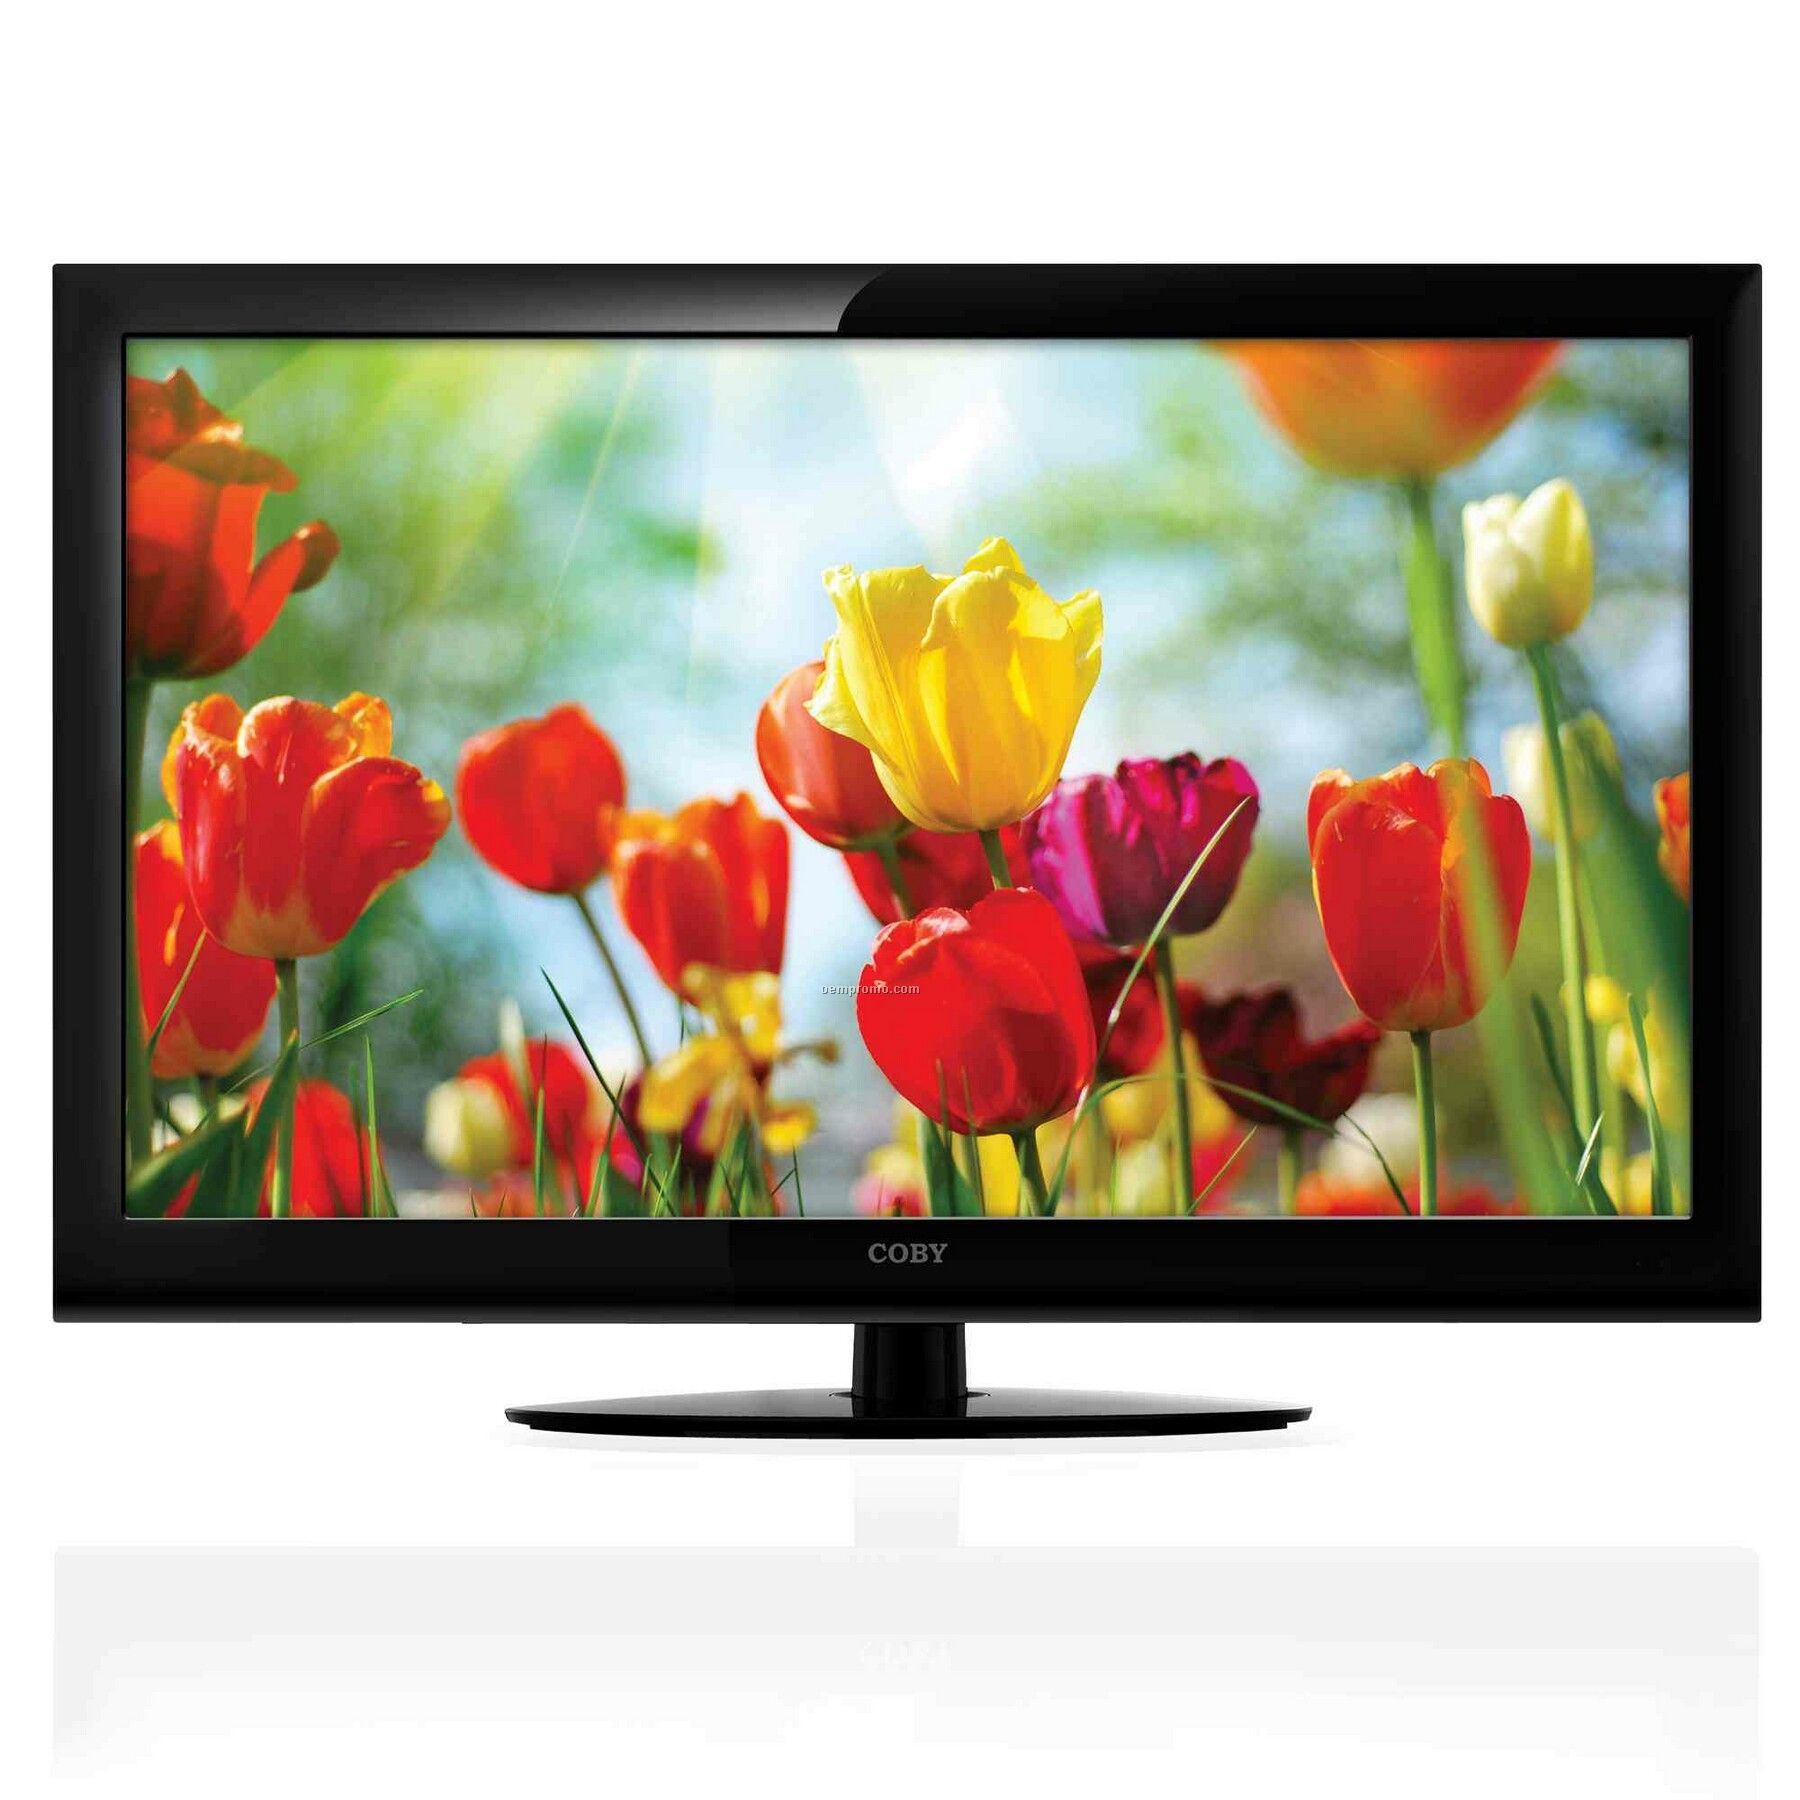 23" Class LED High-definition Tv